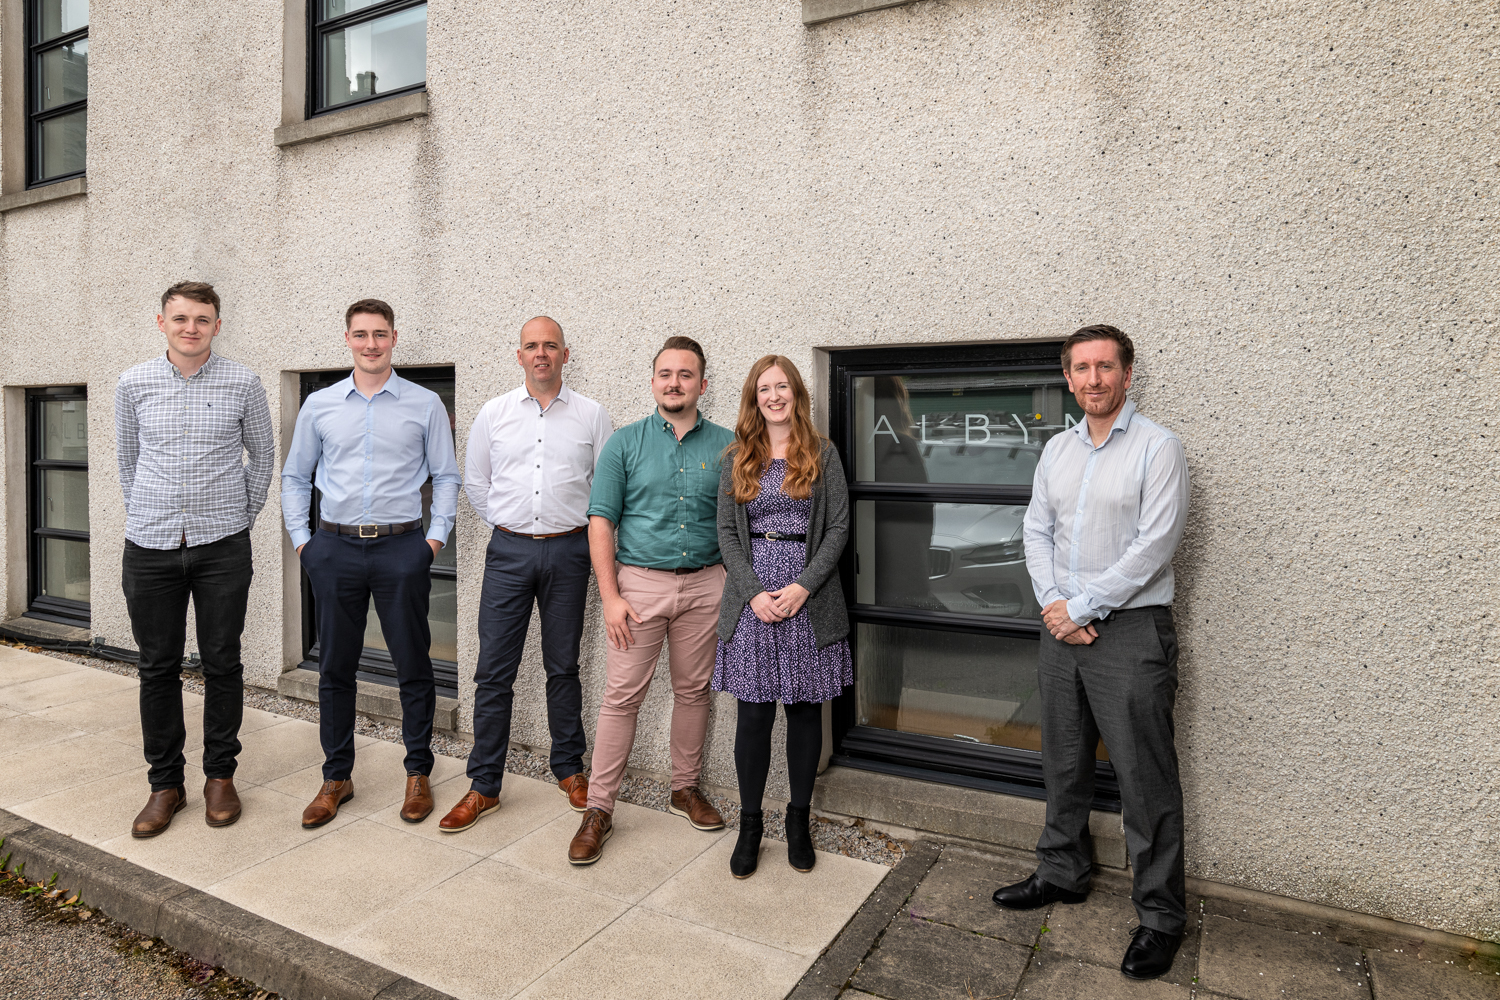 Albyn Architects expands with office move and new hires